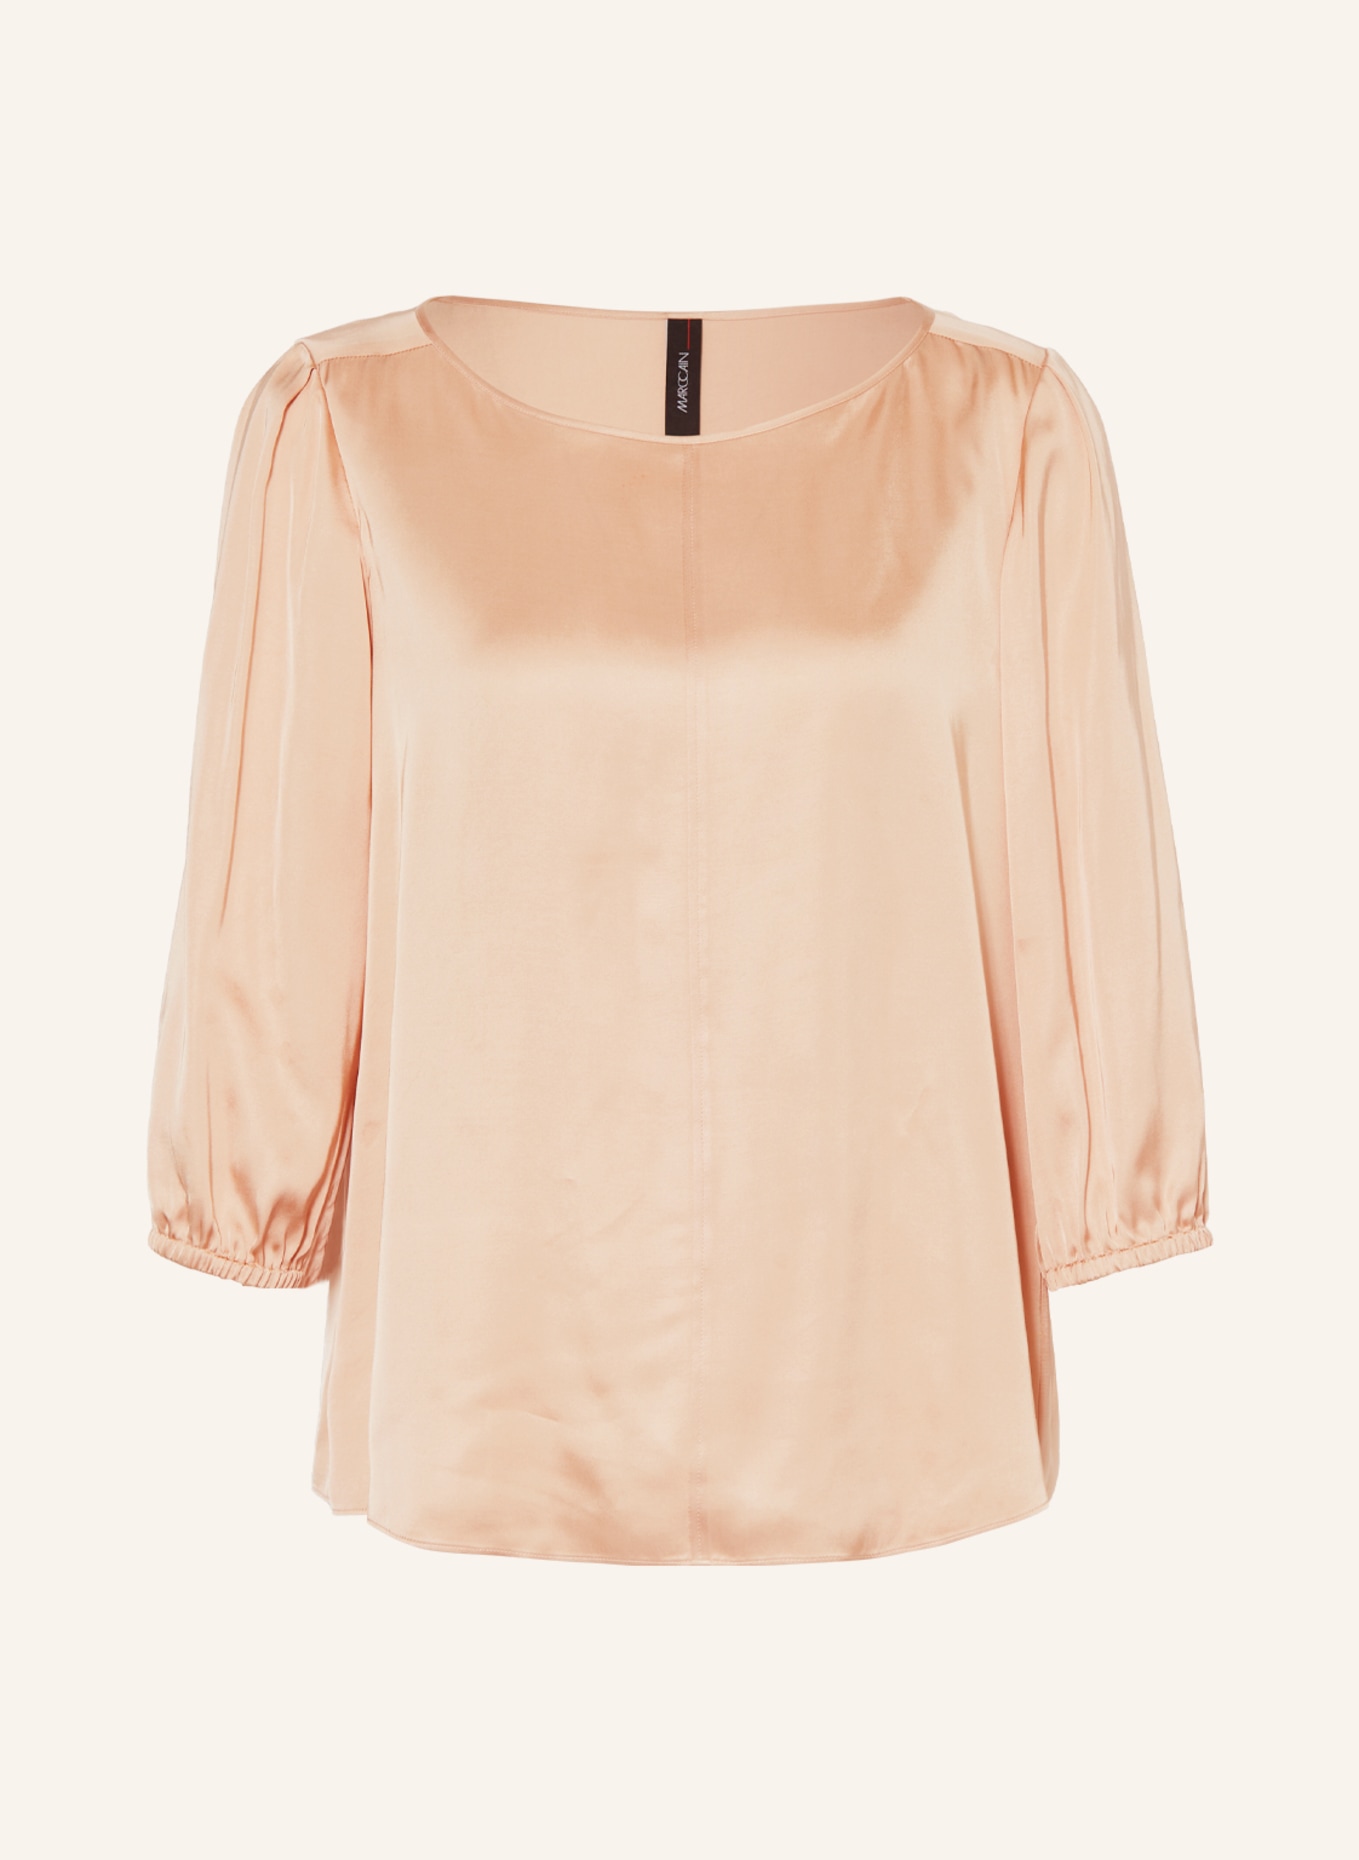 MARC CAIN Shirt blouse made of satin with 3/4 sleeves, Color: 209 sandy beige (Image 1)